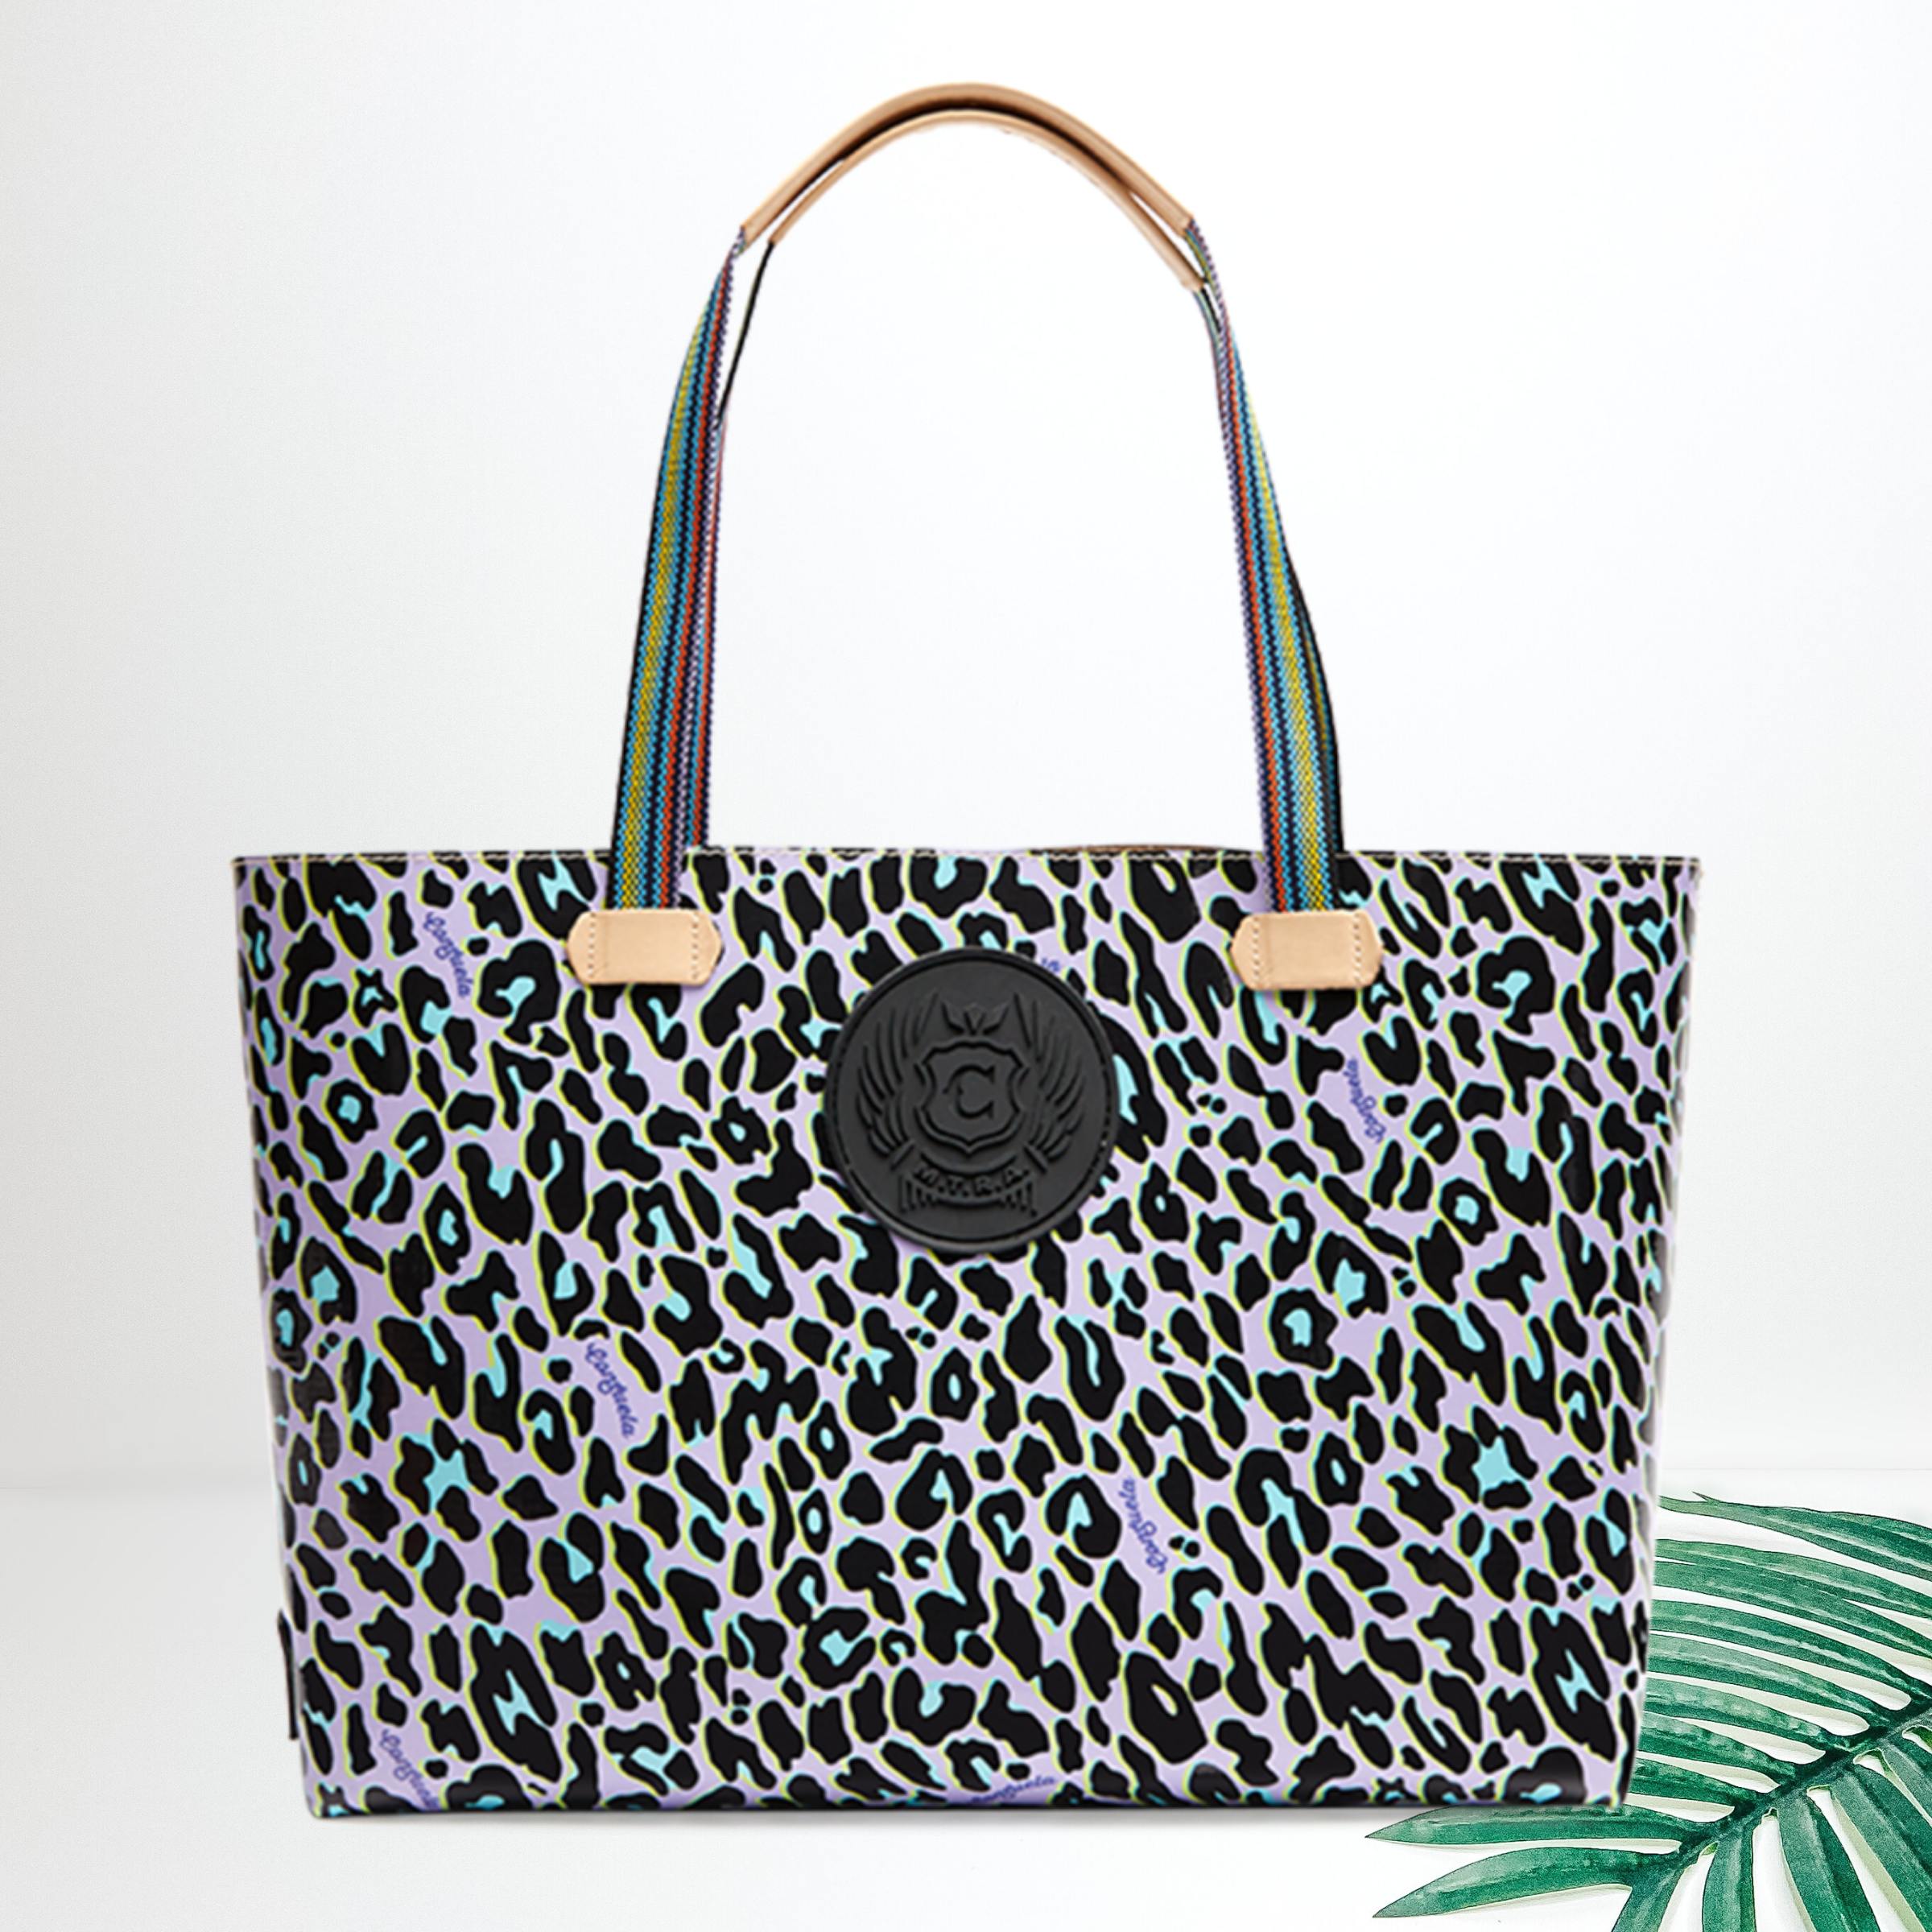 A large purple leopard print tote with a black branded patch. Pictured on white background with a palm leaf.